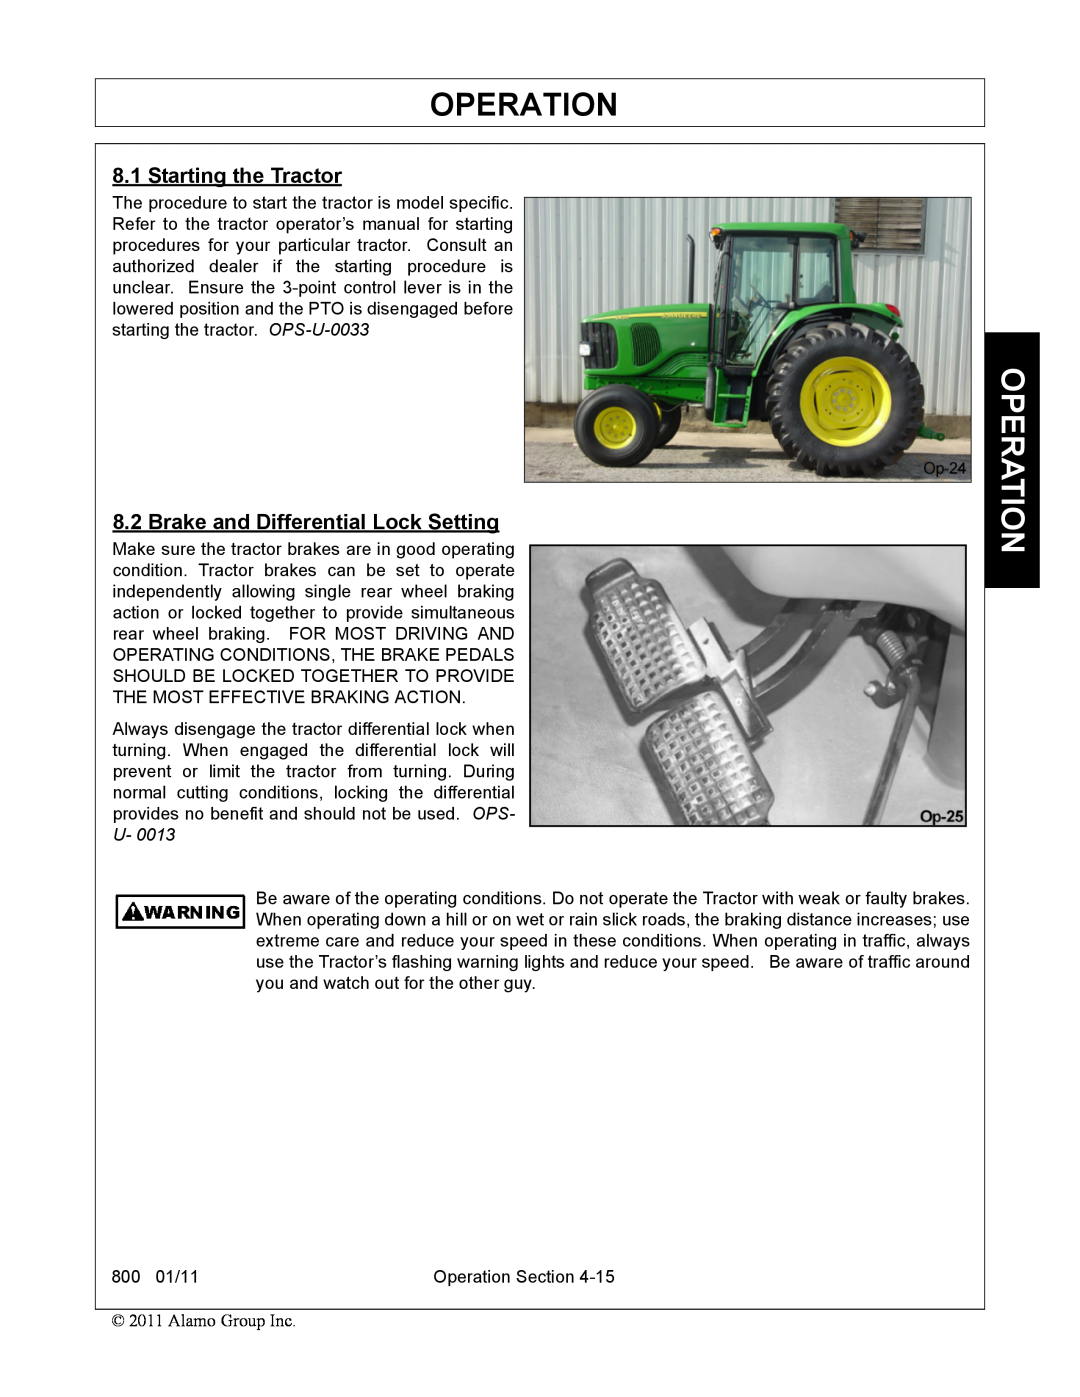 Alamo 800 manual Operation, Starting the Tractor, Brake and Differential Lock Setting 